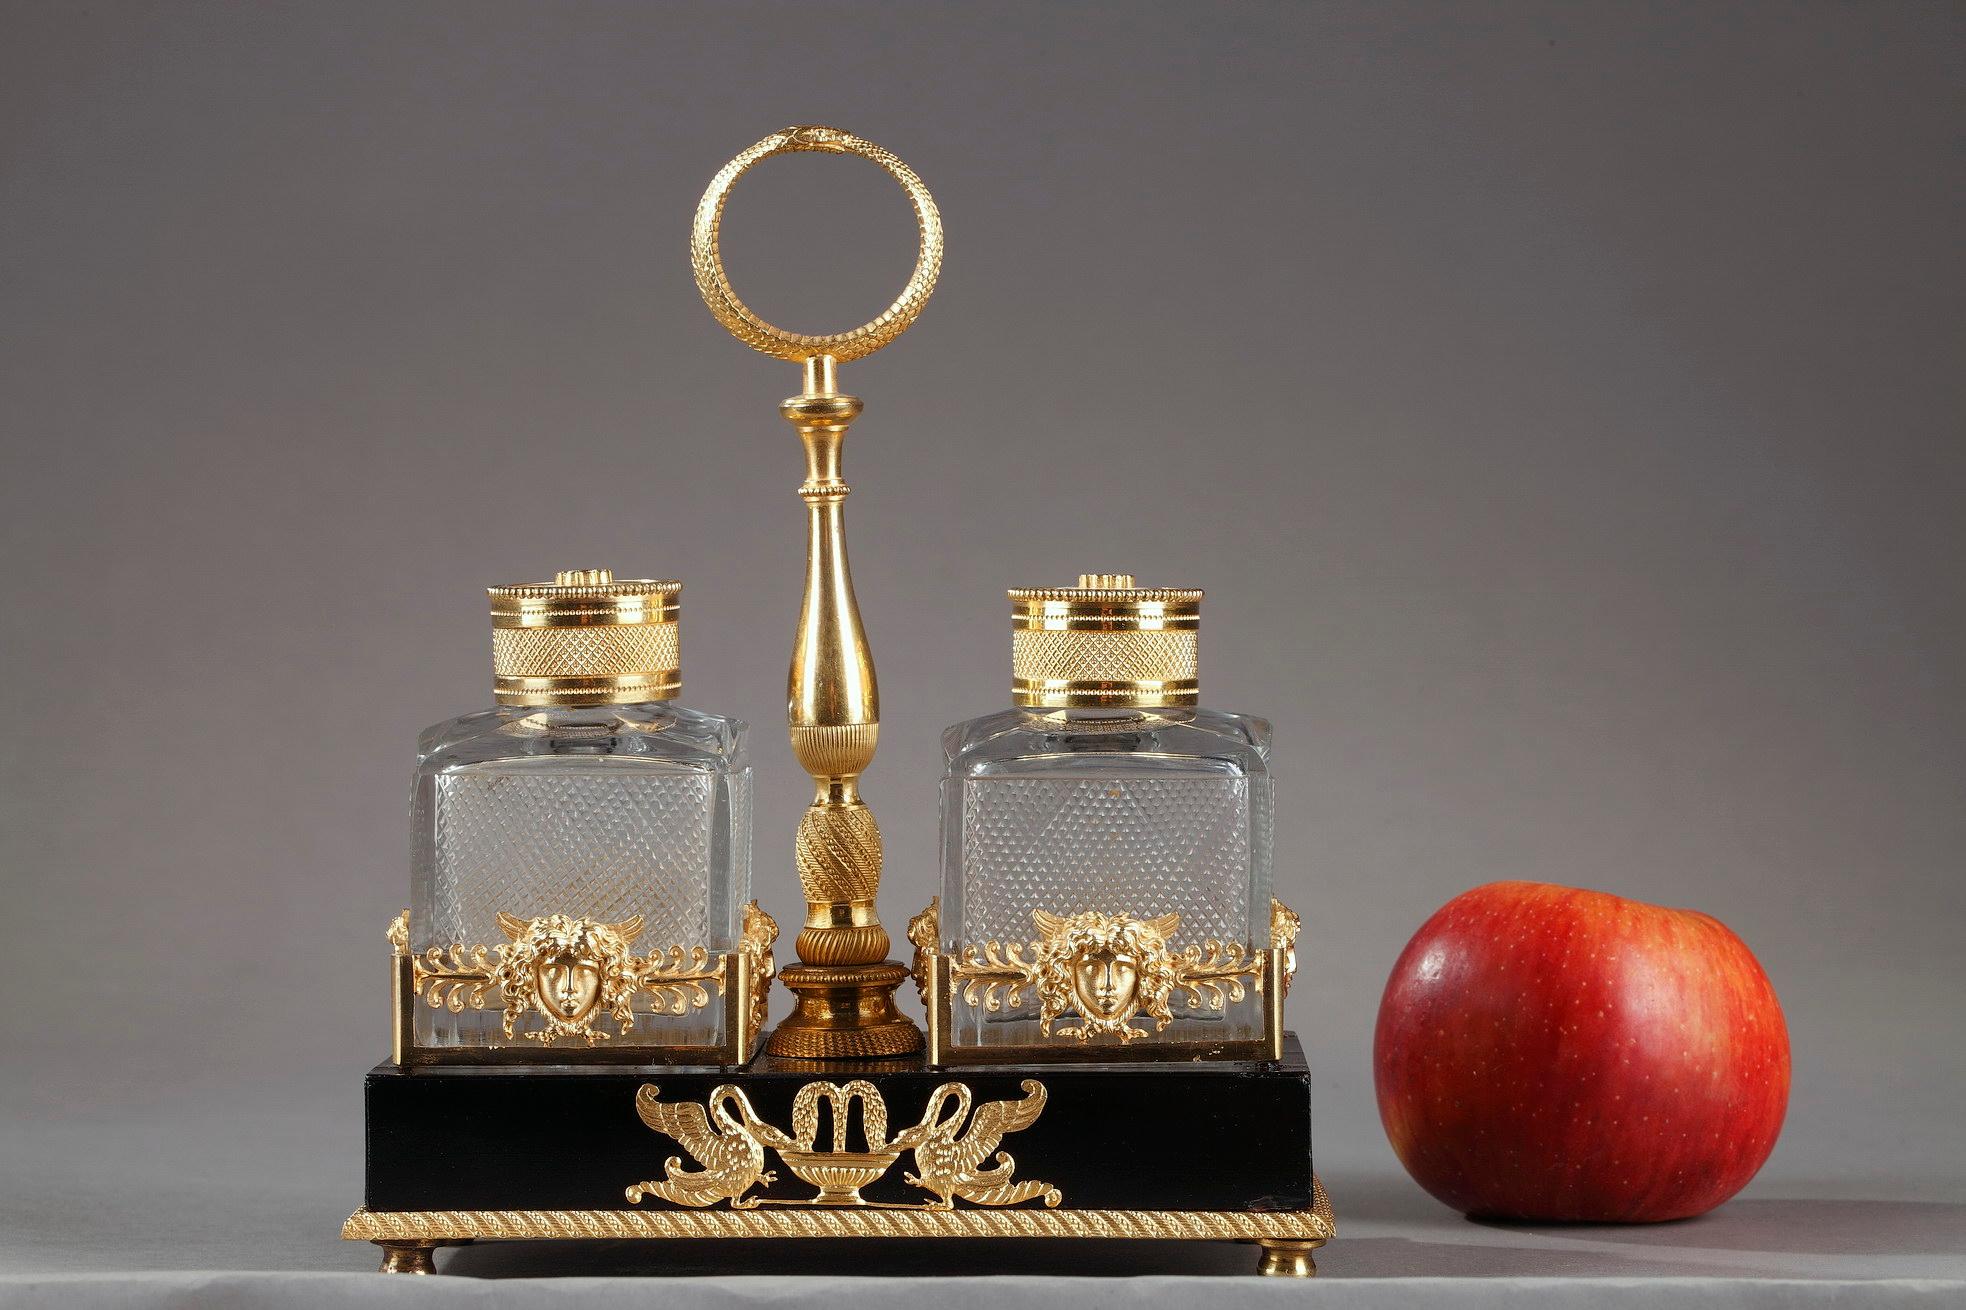 Empire inkstand crafted of ebony, gilt bronze and crystal. Exhibiting an exquisite design of Mercury heads and palmette, this set is comprised of two cut-crystal jars, serving as an inkwell, upon a rectangular ebony base highlighted with swans